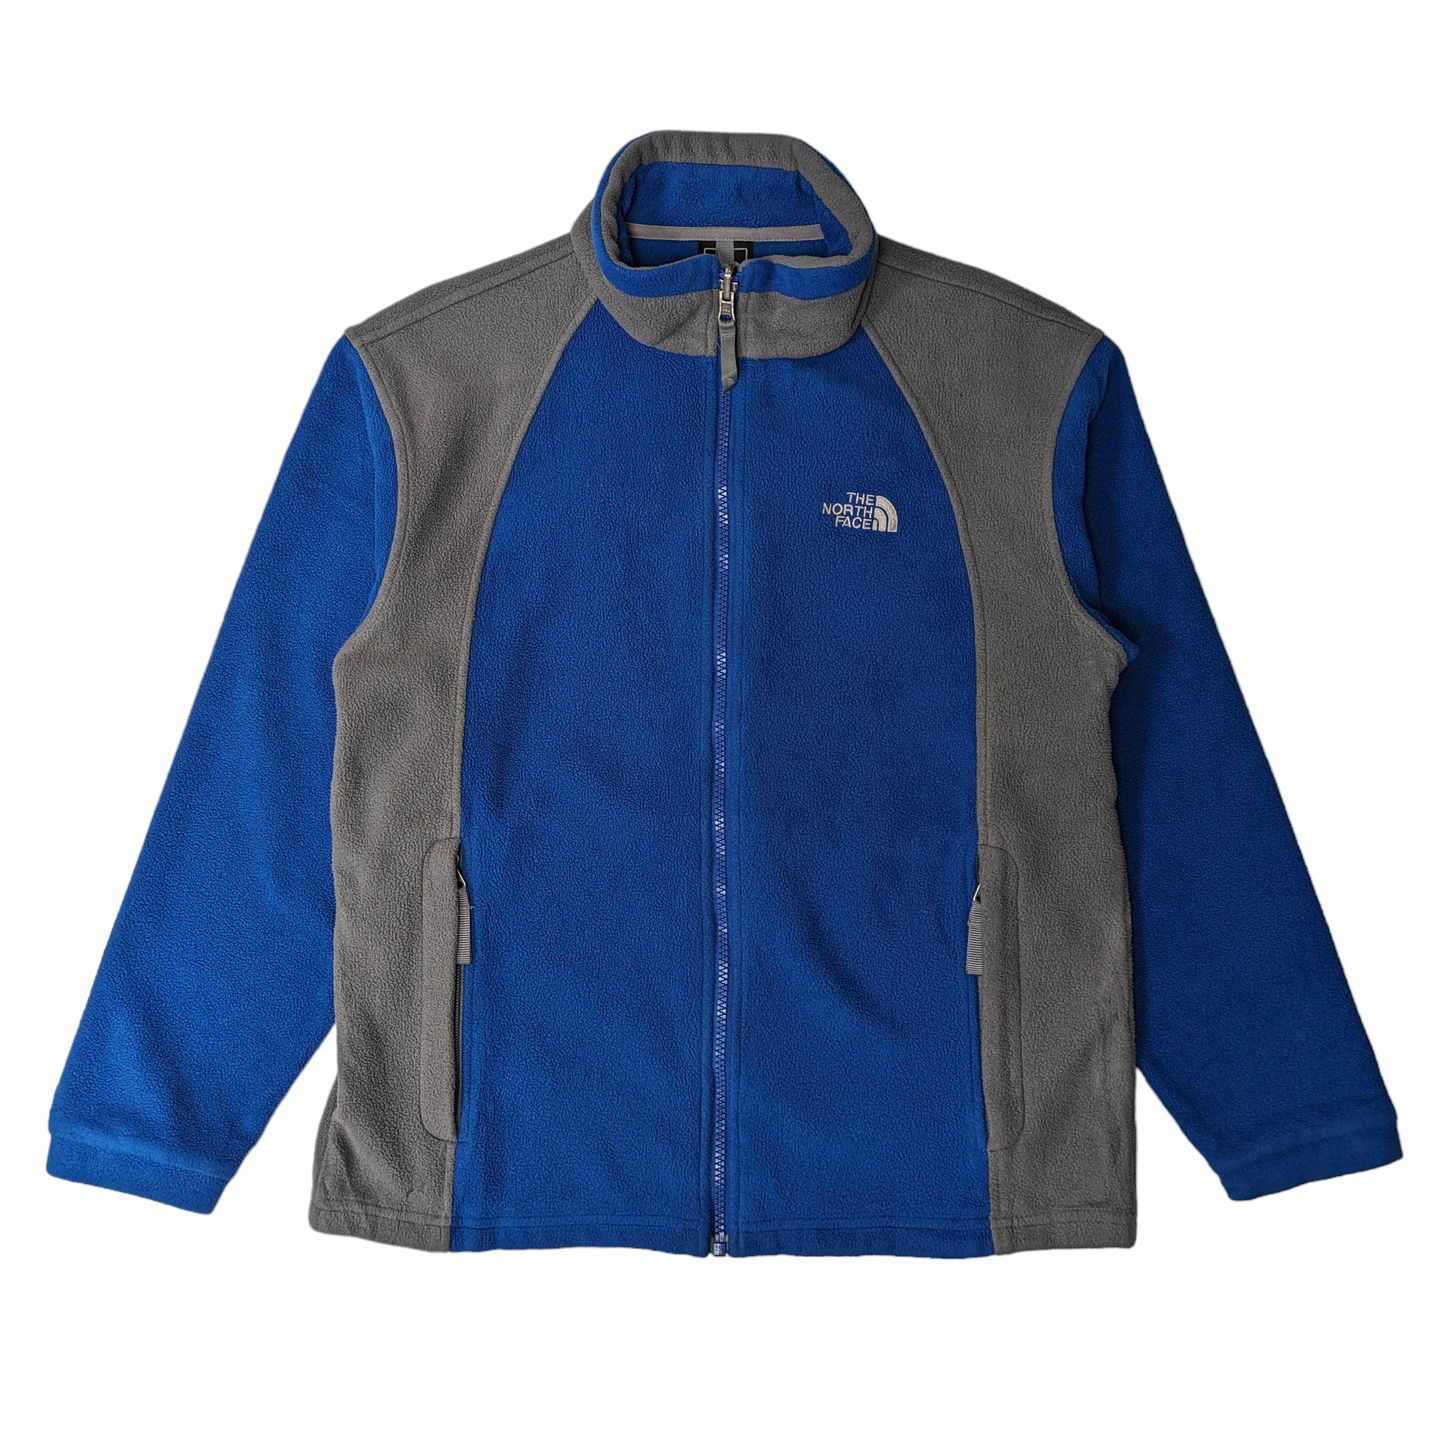 The North Face Fleece Size XS (Youth Size L)